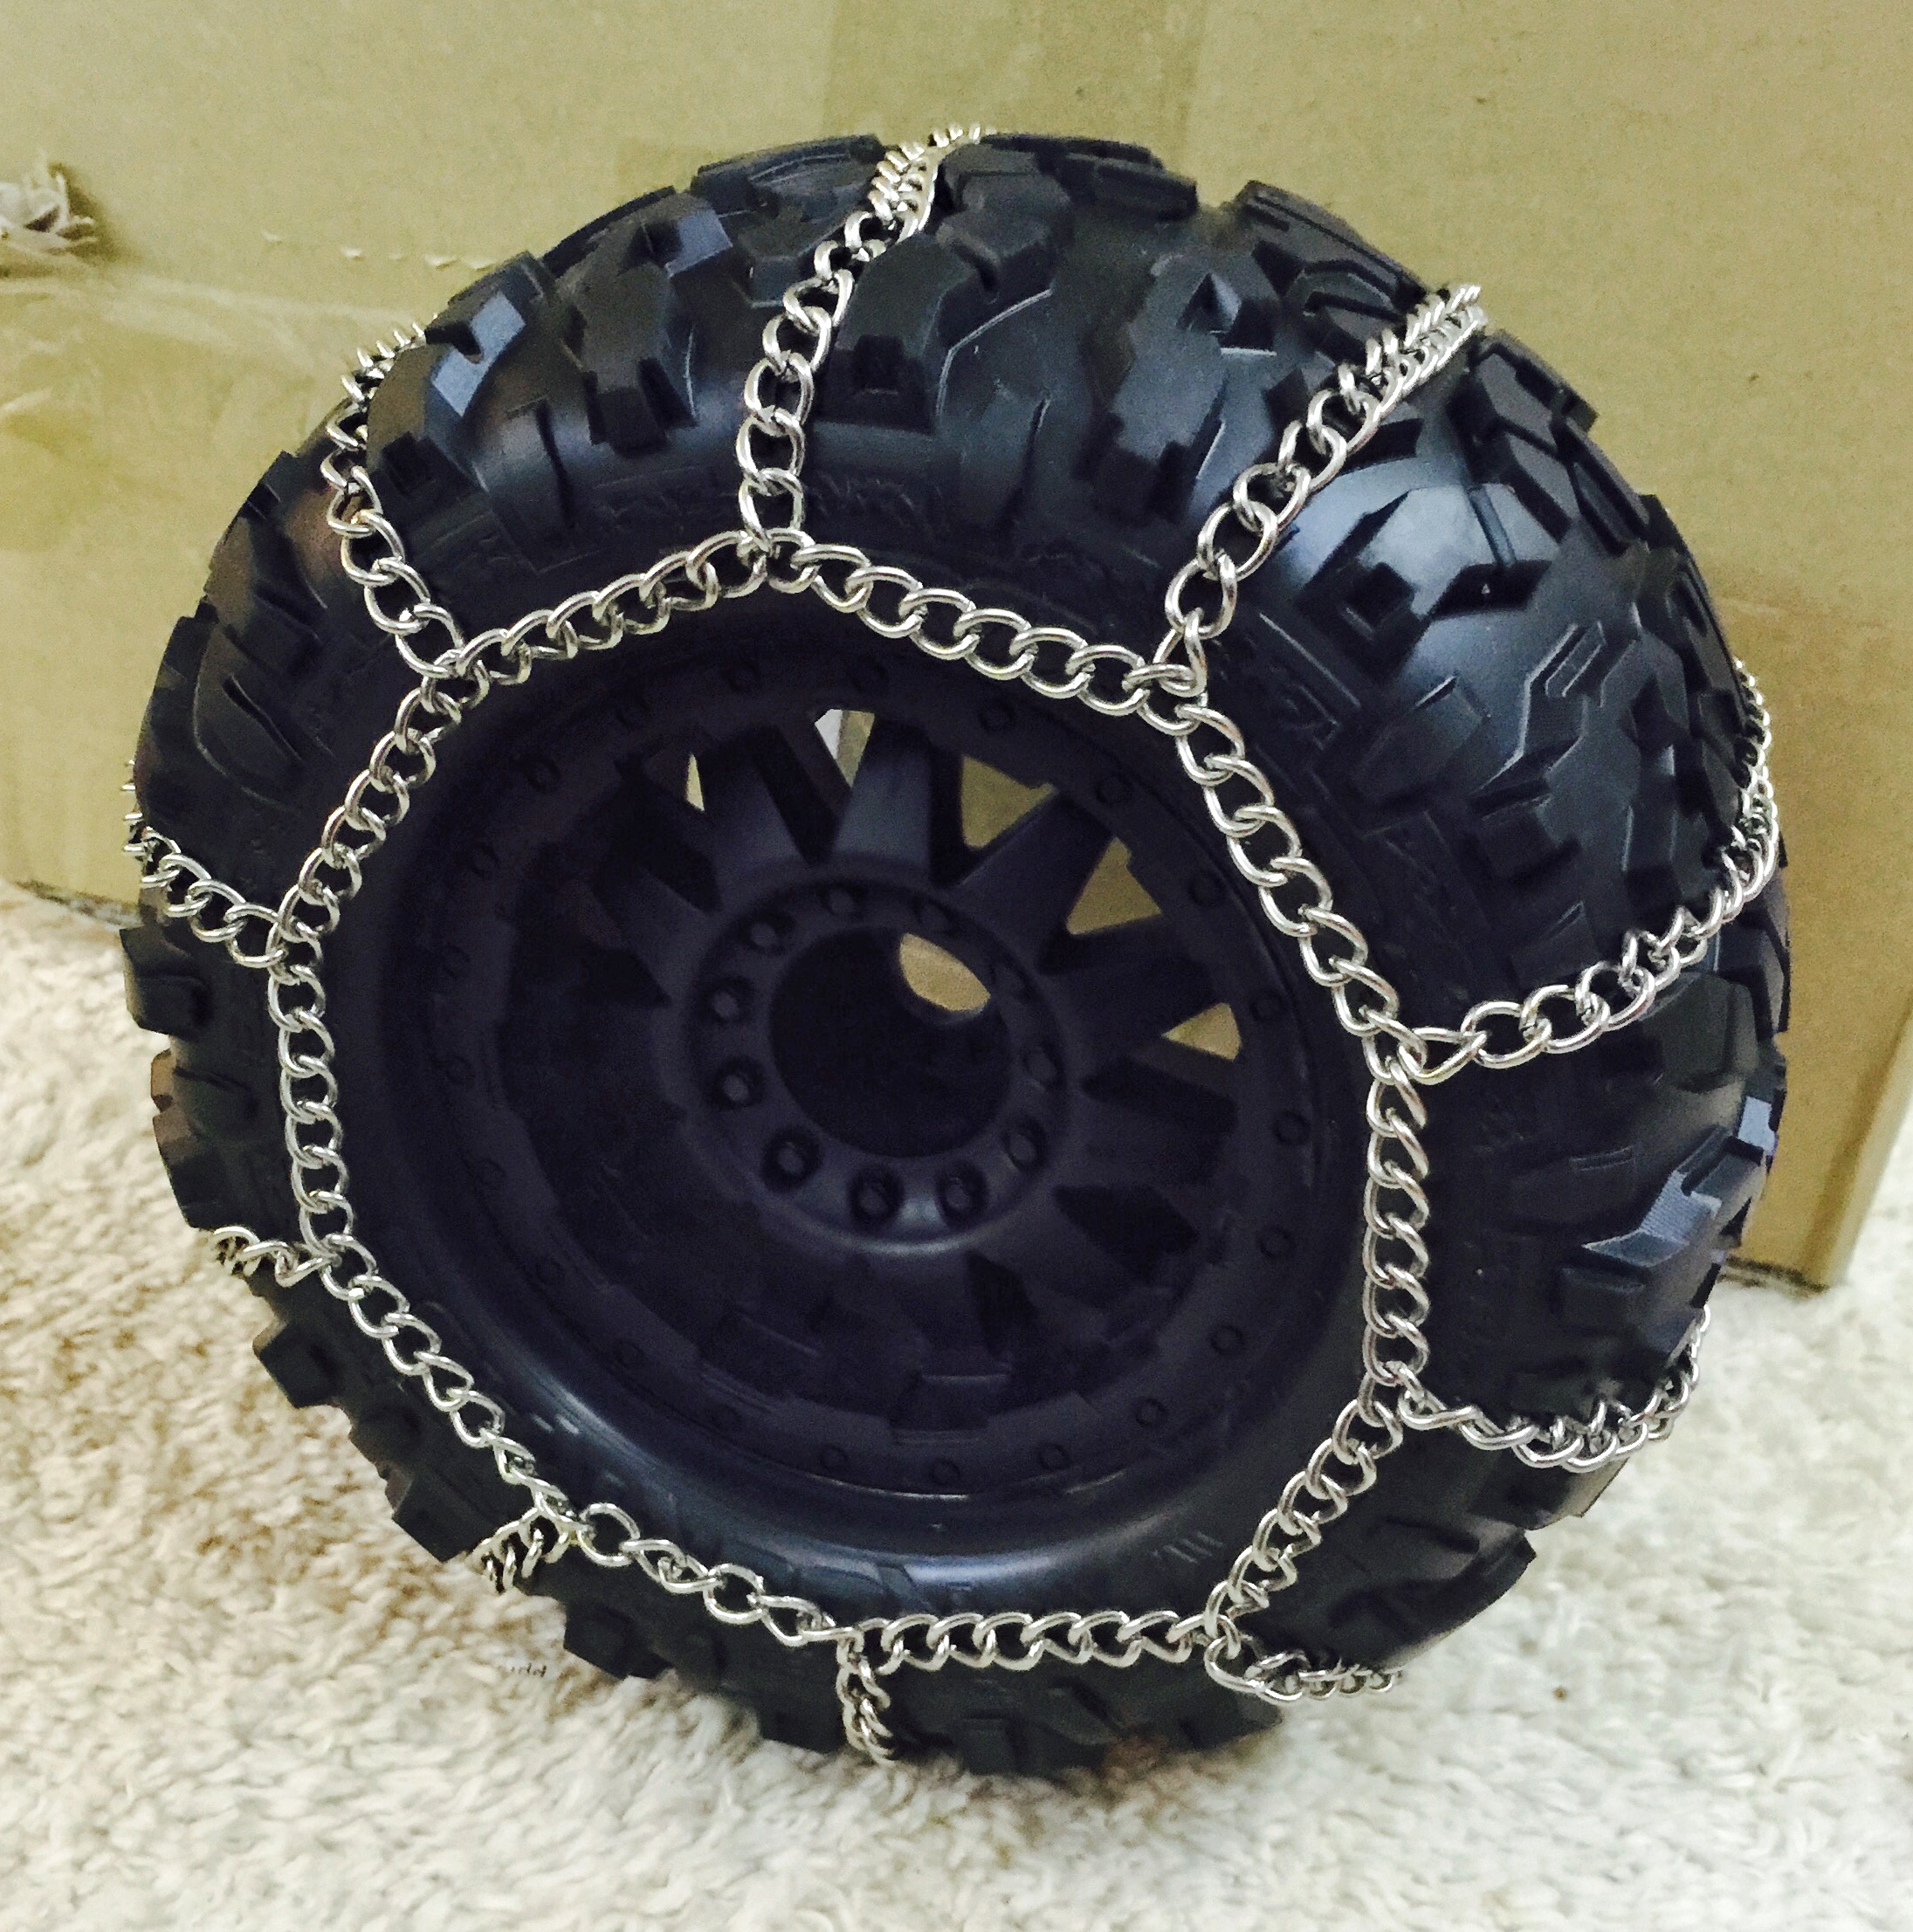 Snow chain mounted